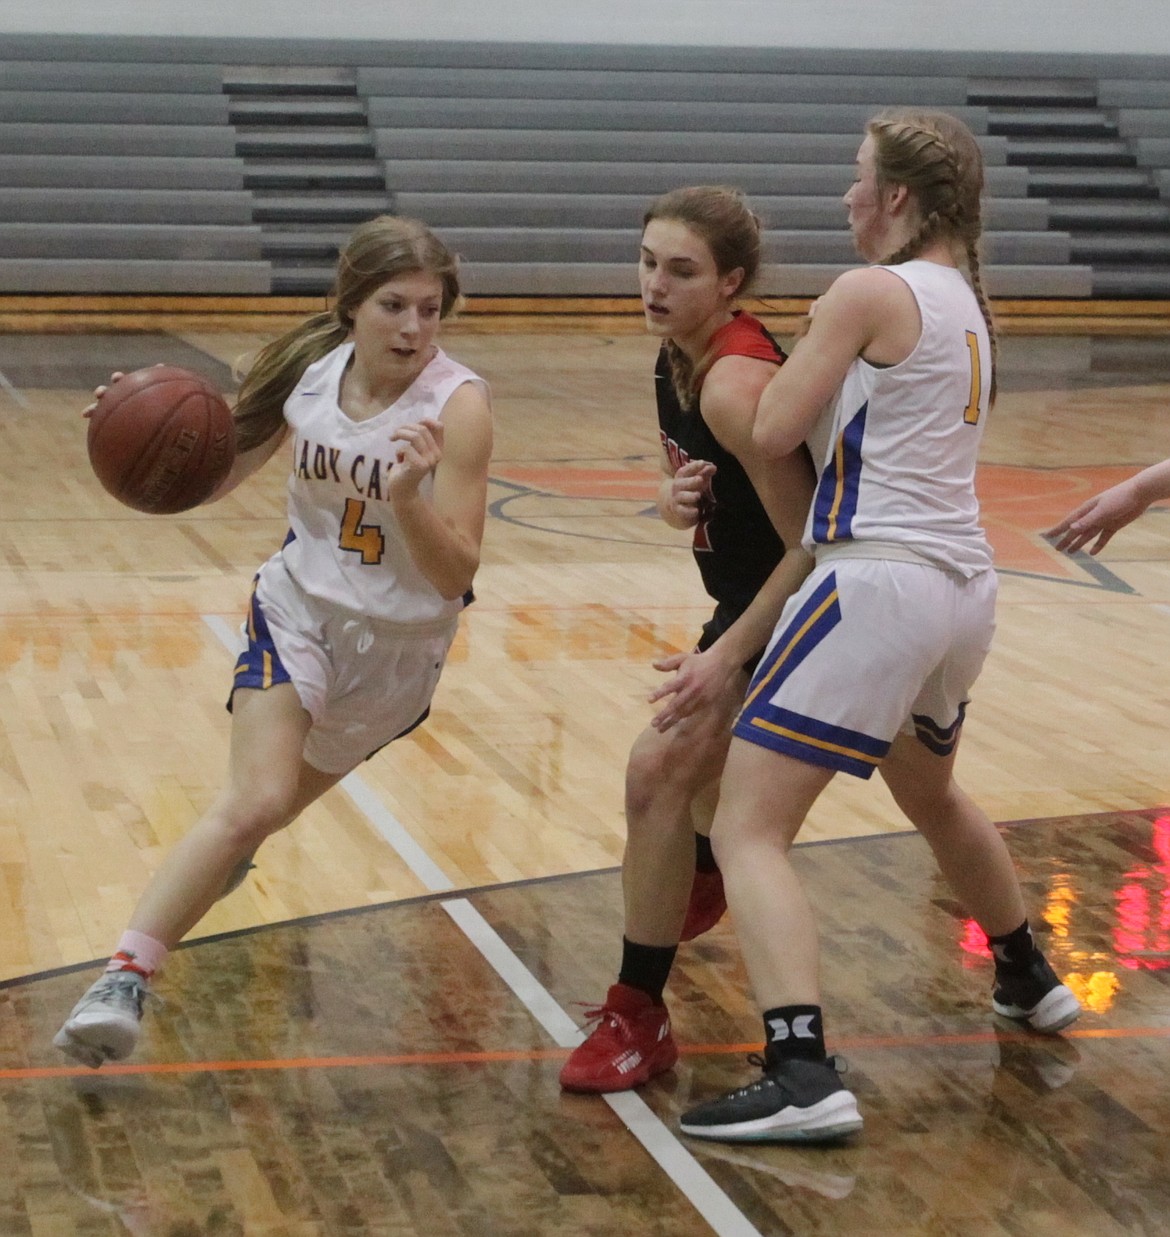 MARK NELKE/Press
Eloise Shelton (4) of Clark Fork uses a screen from Katelyn Matteson to drive to the basket in the first half against Deary in a state 1A Division II girls basketball play-in game Saturday at Post Falls High.